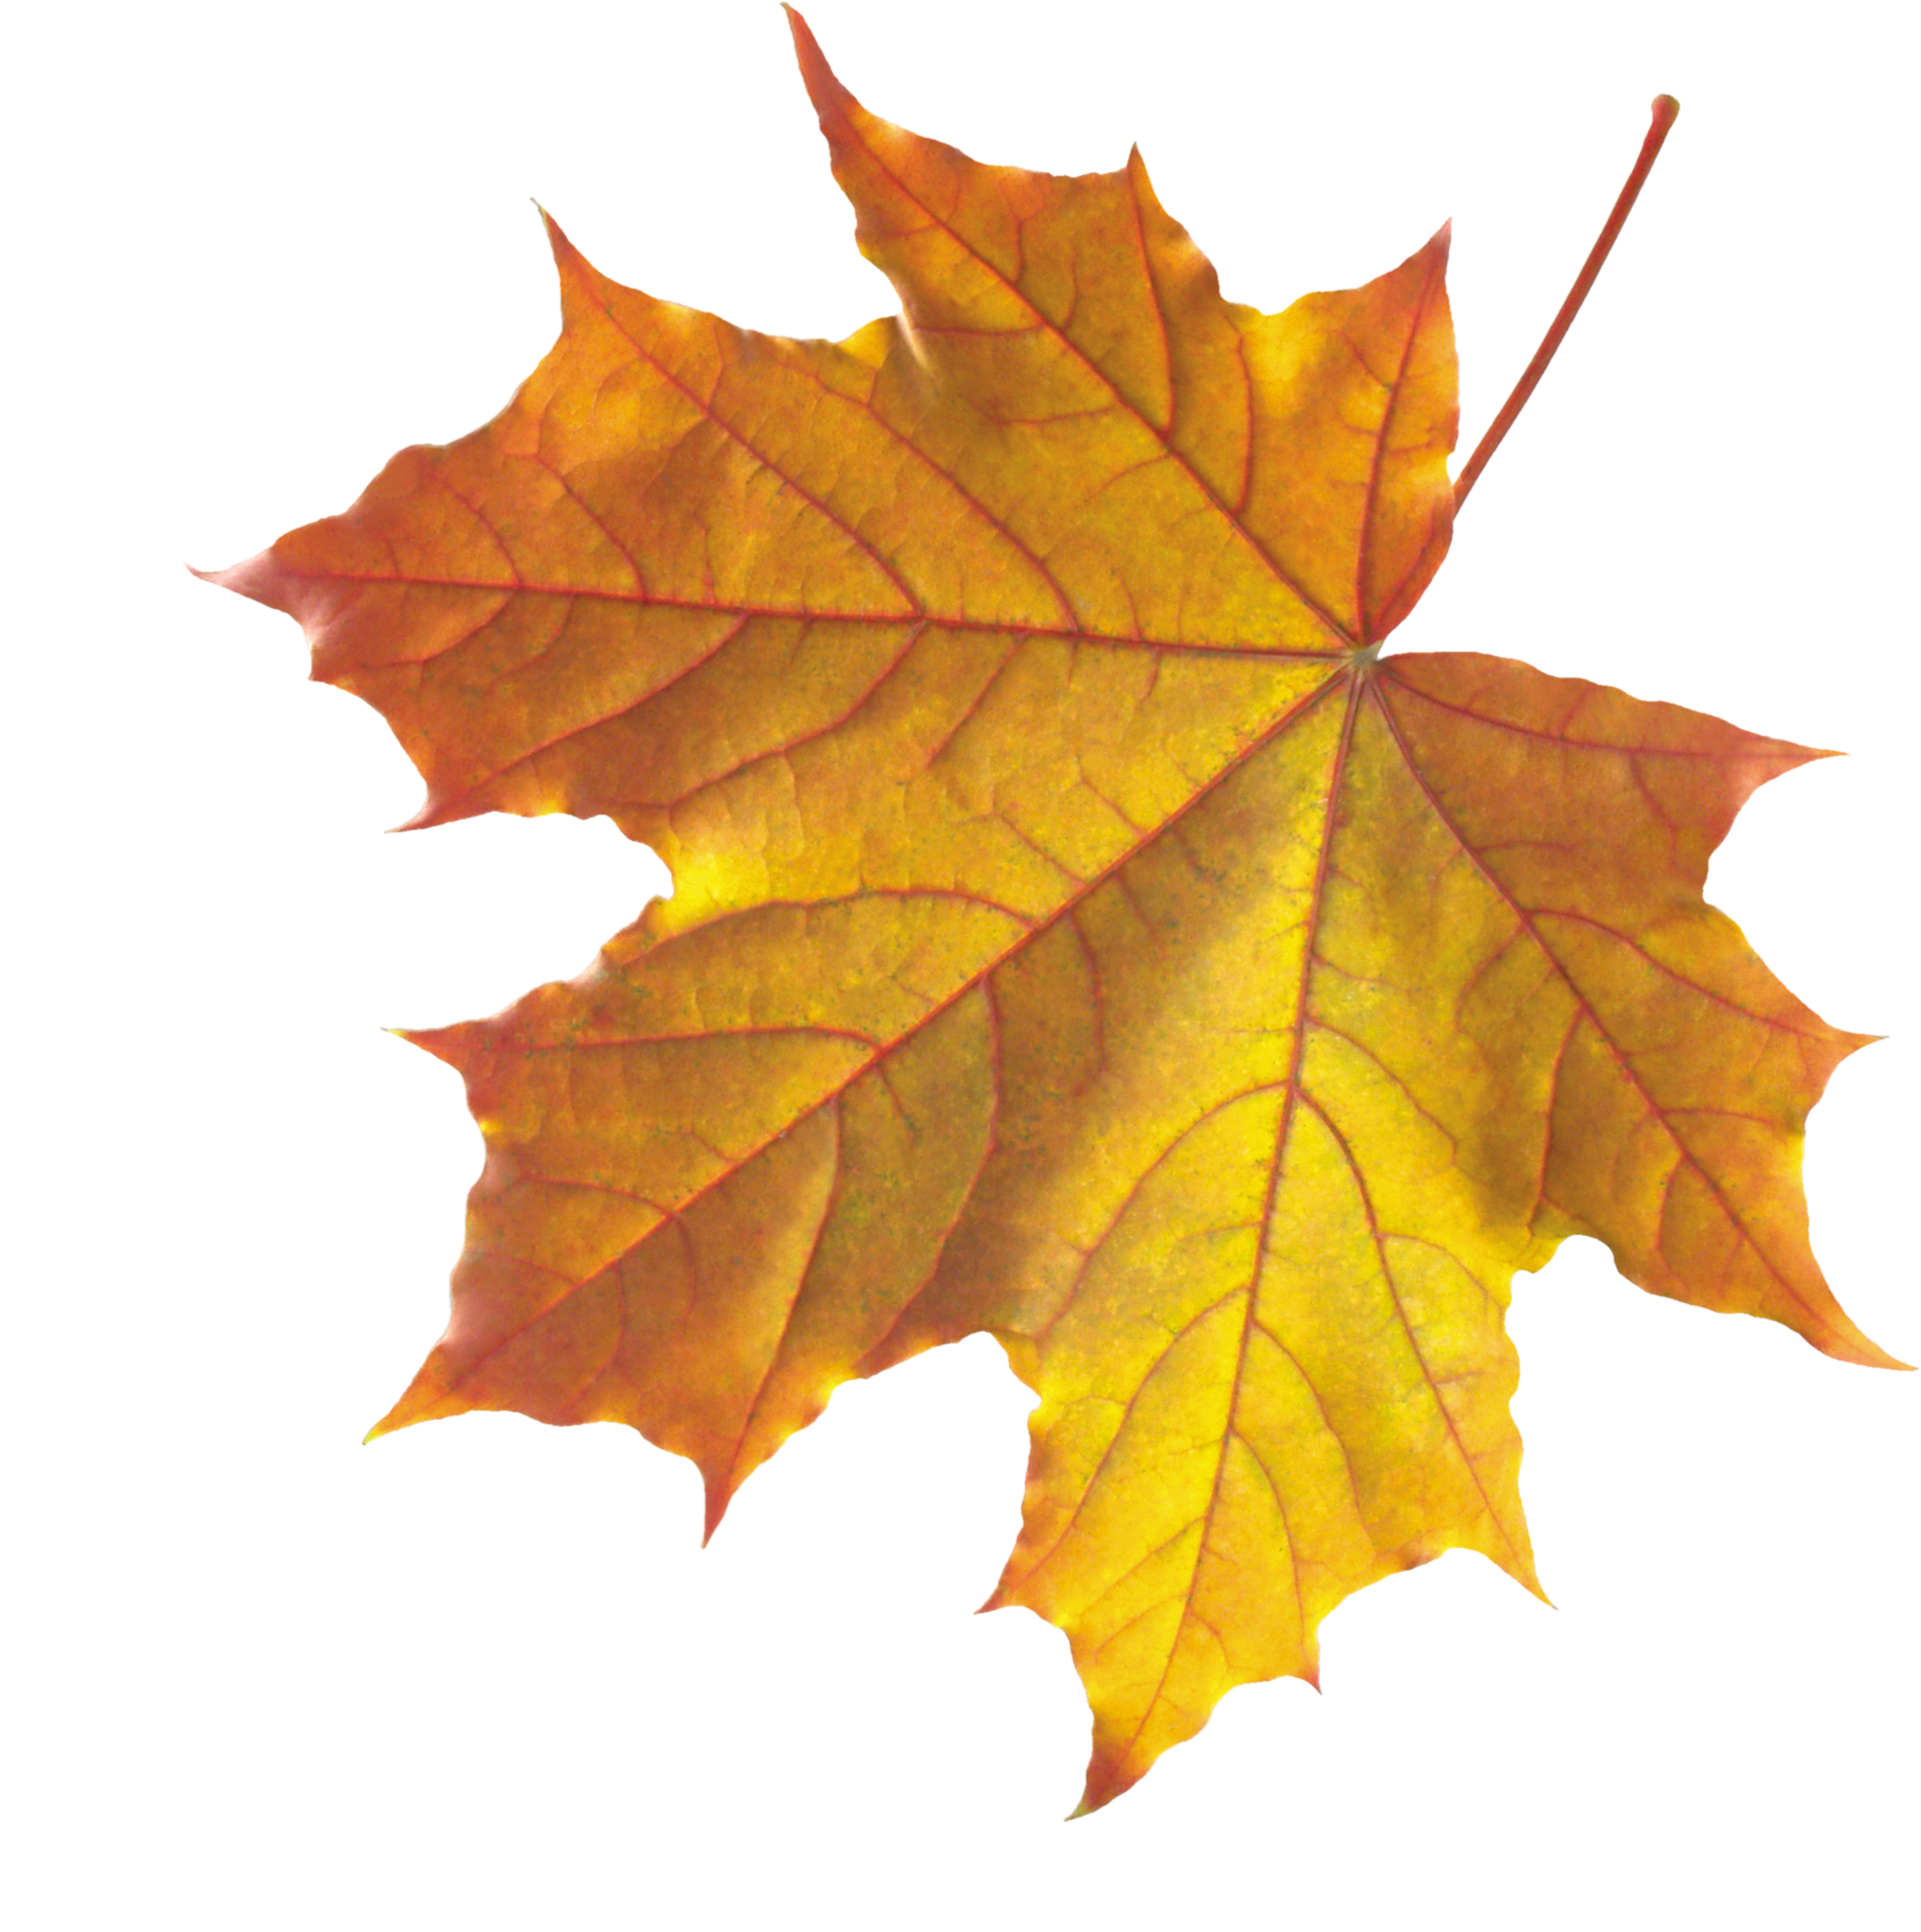 Yellow Autumn Leaves PNG Image - PurePNG | Free transparent CC0 PNG ...